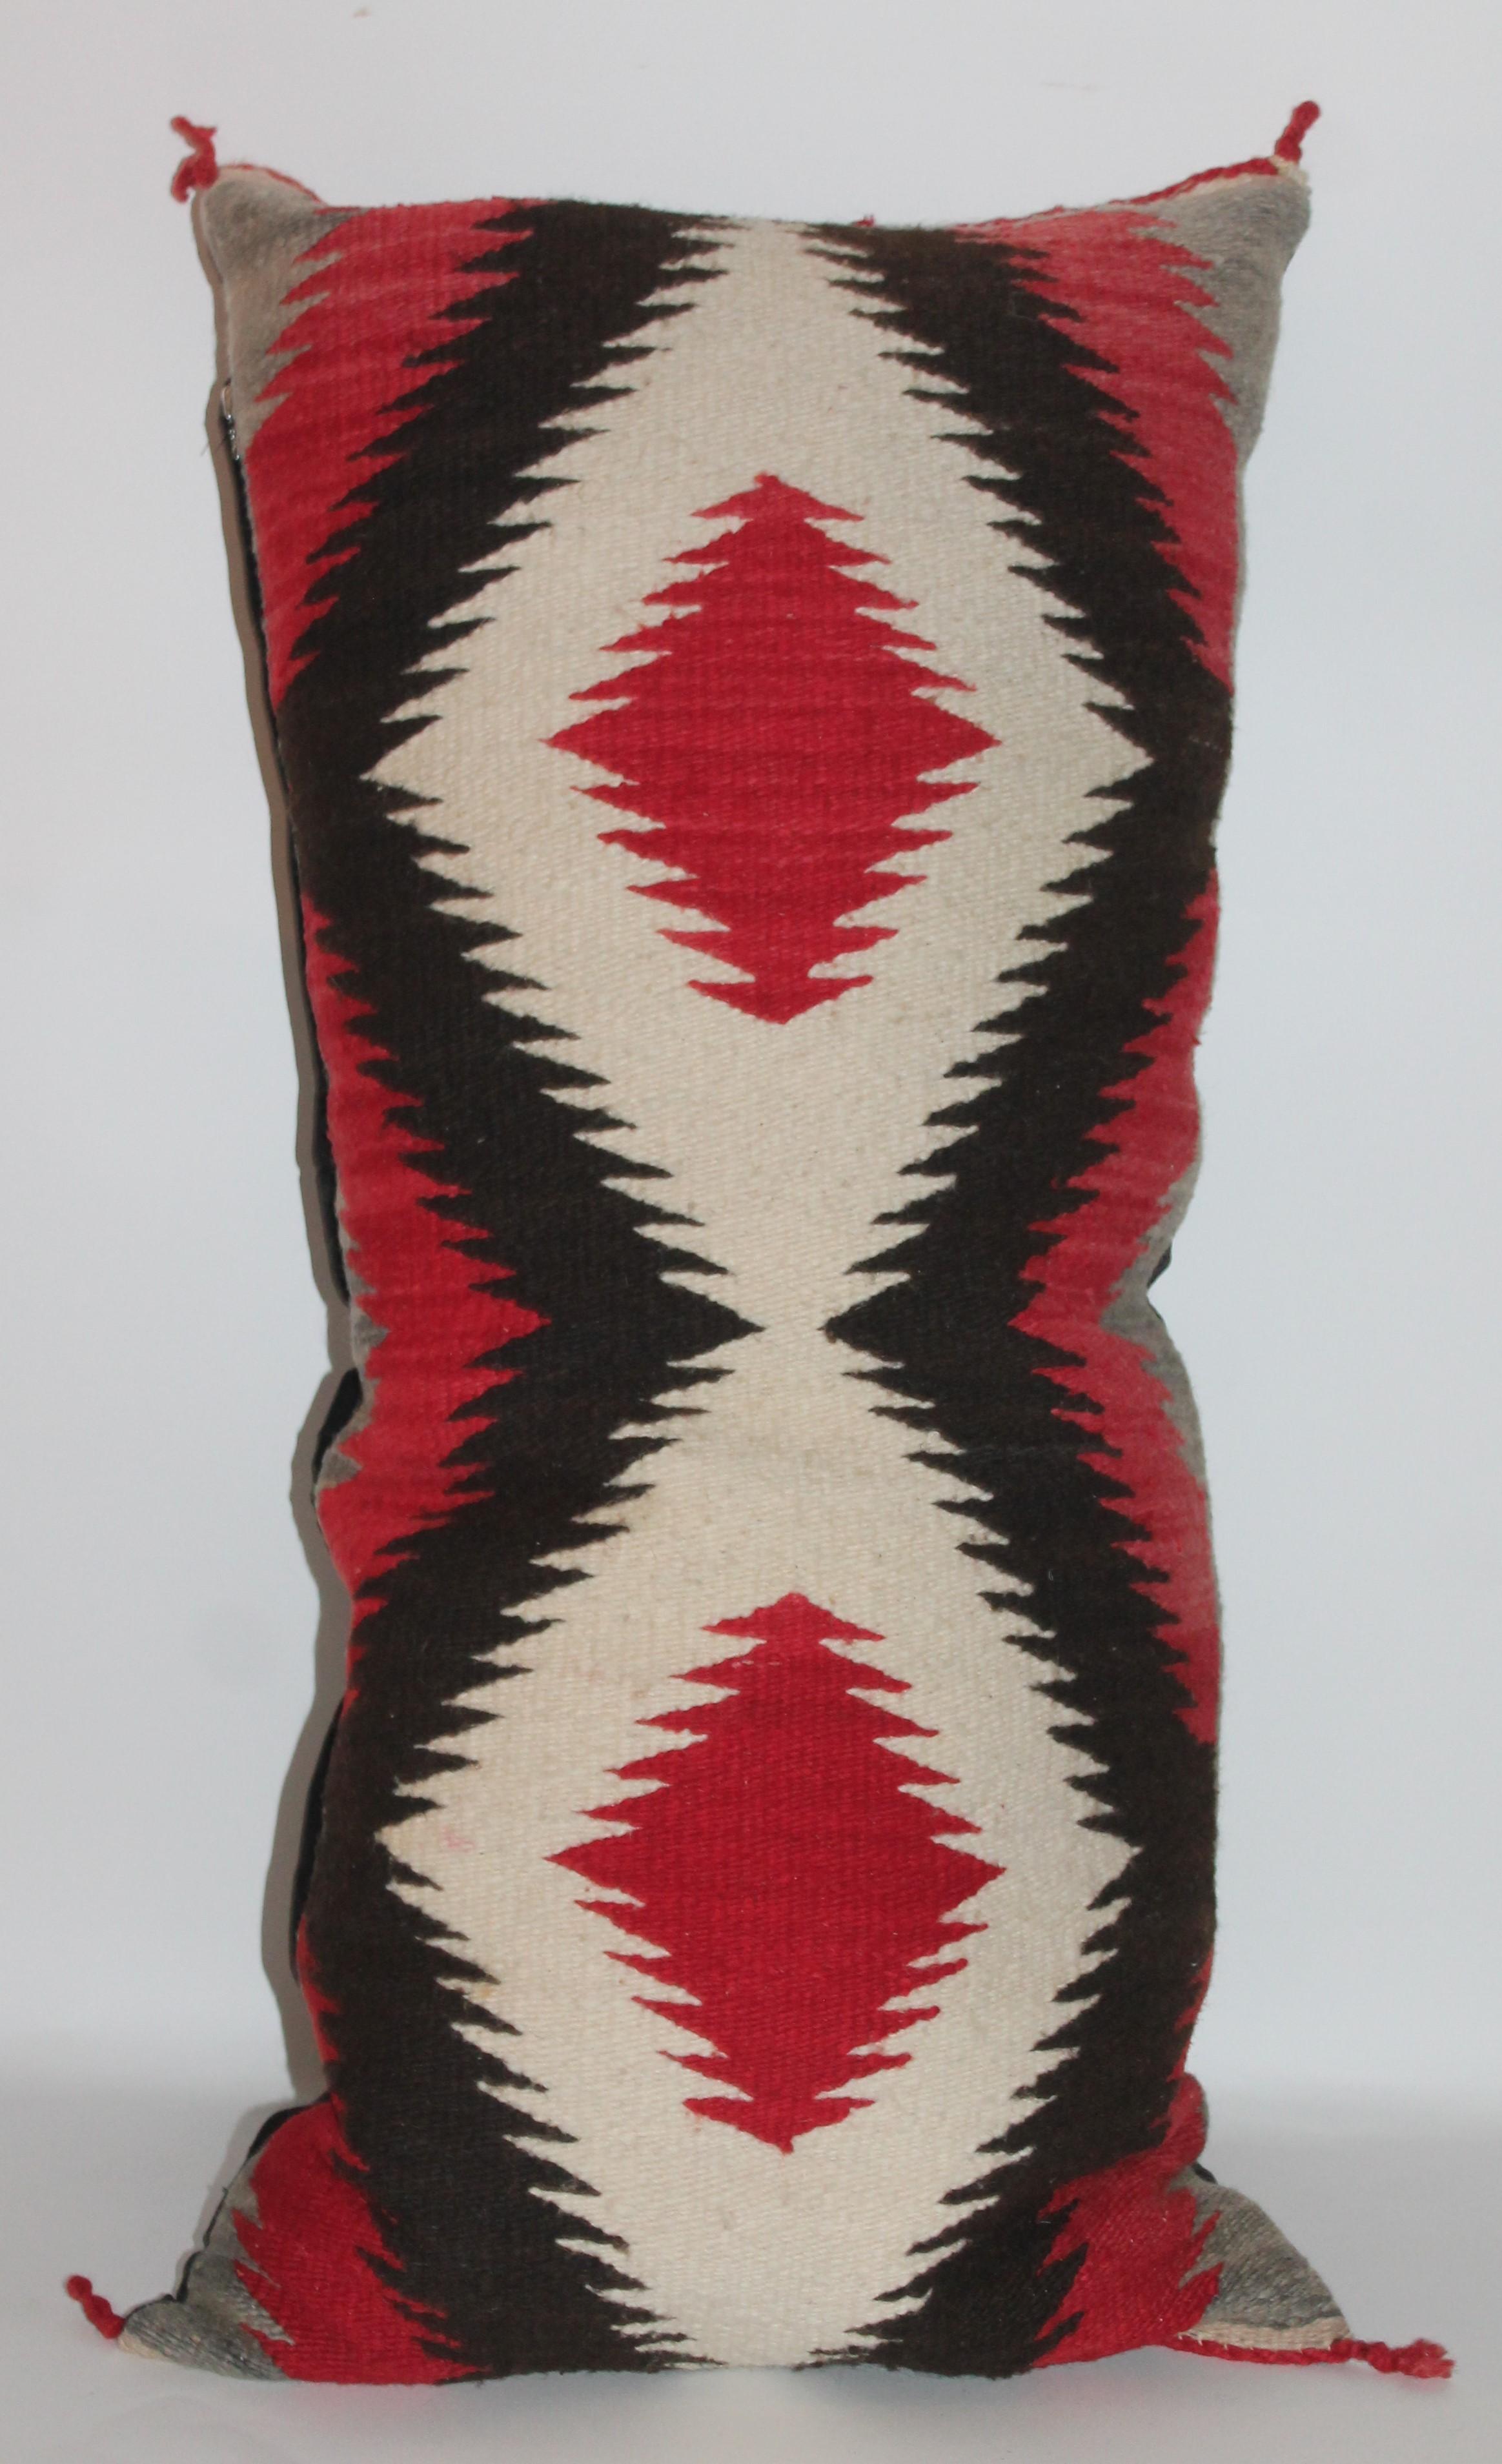 Adirondack Collection of Five Navajo Weaving Pillows / Group of Five